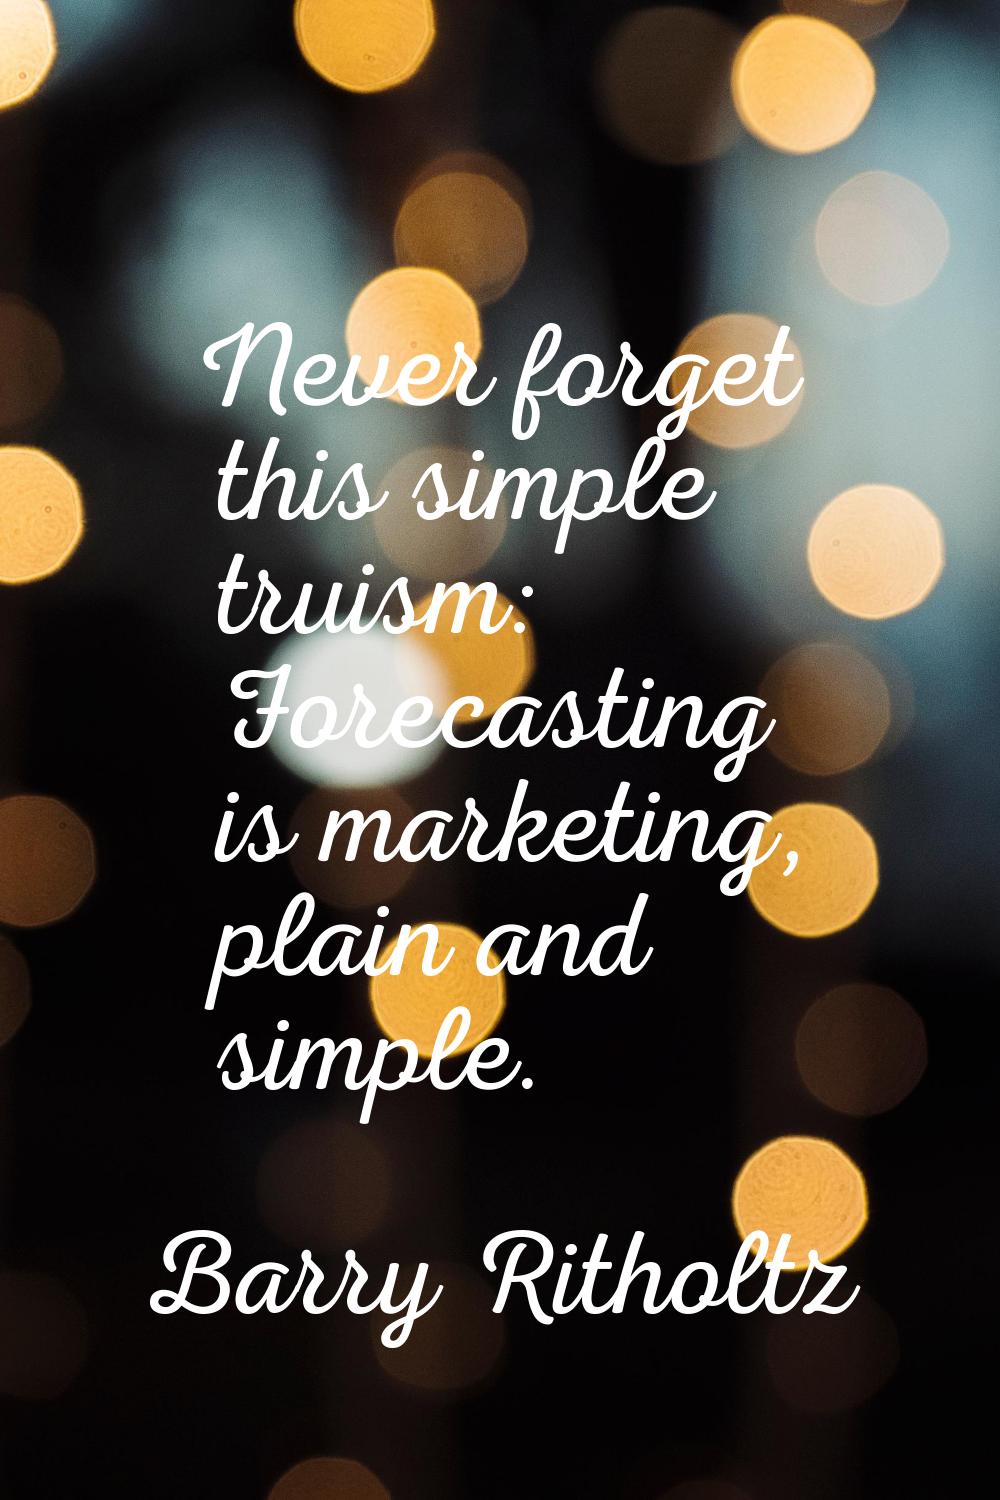 Never forget this simple truism: Forecasting is marketing, plain and simple.